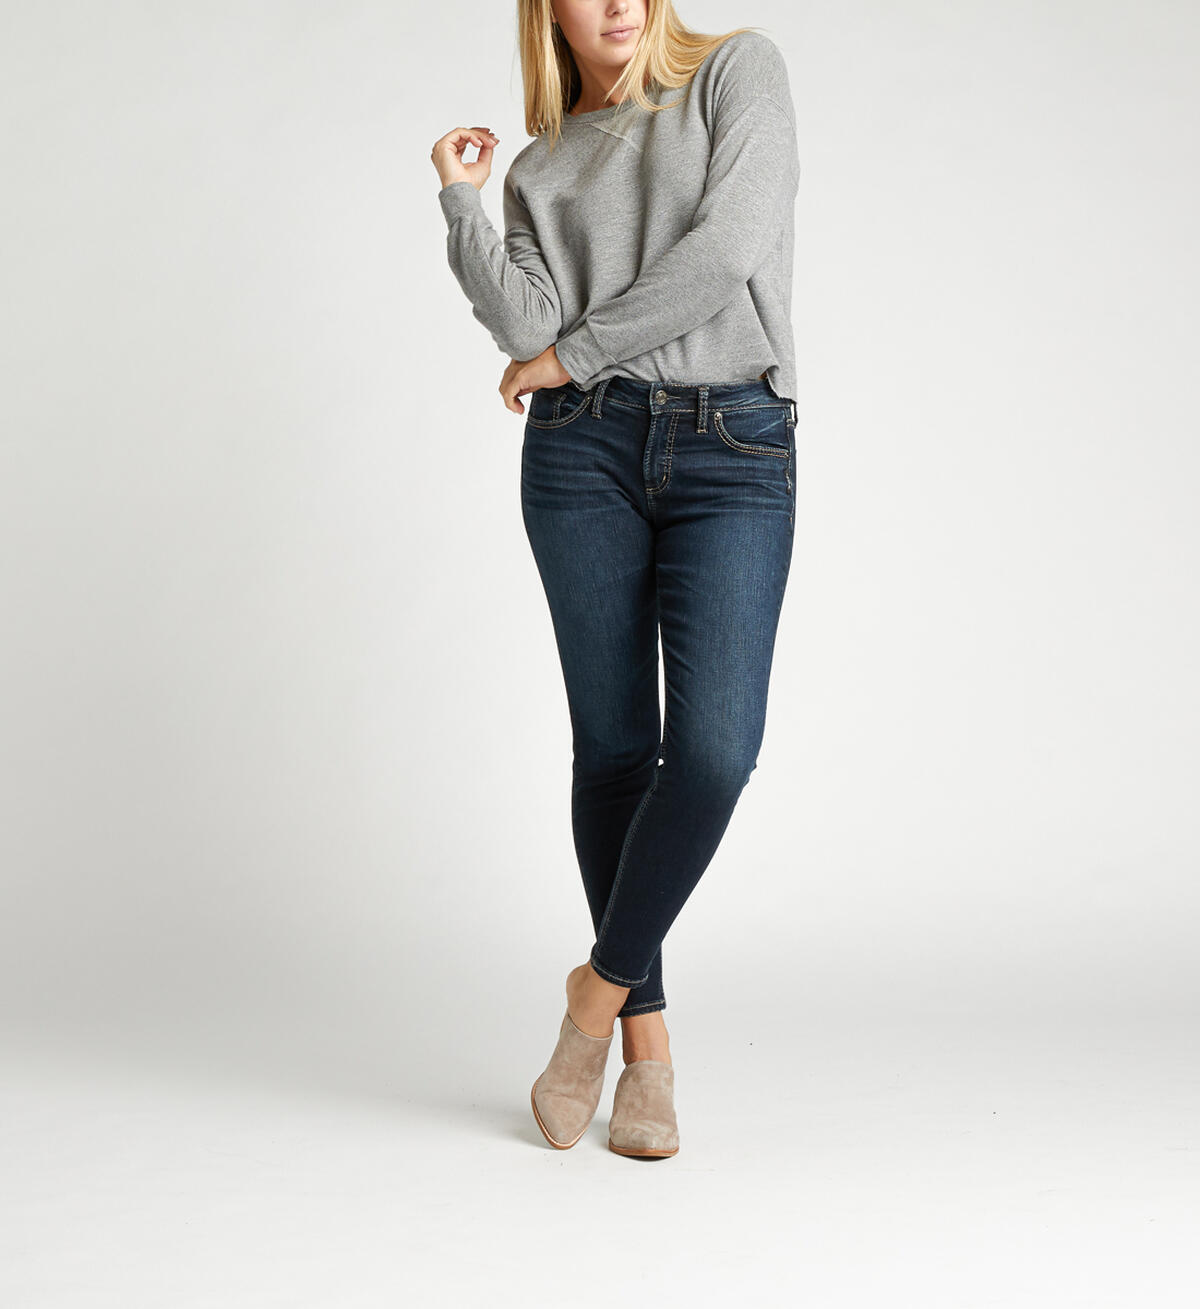 Avery High Rise Skinny Jeans, , hi-res image number 0